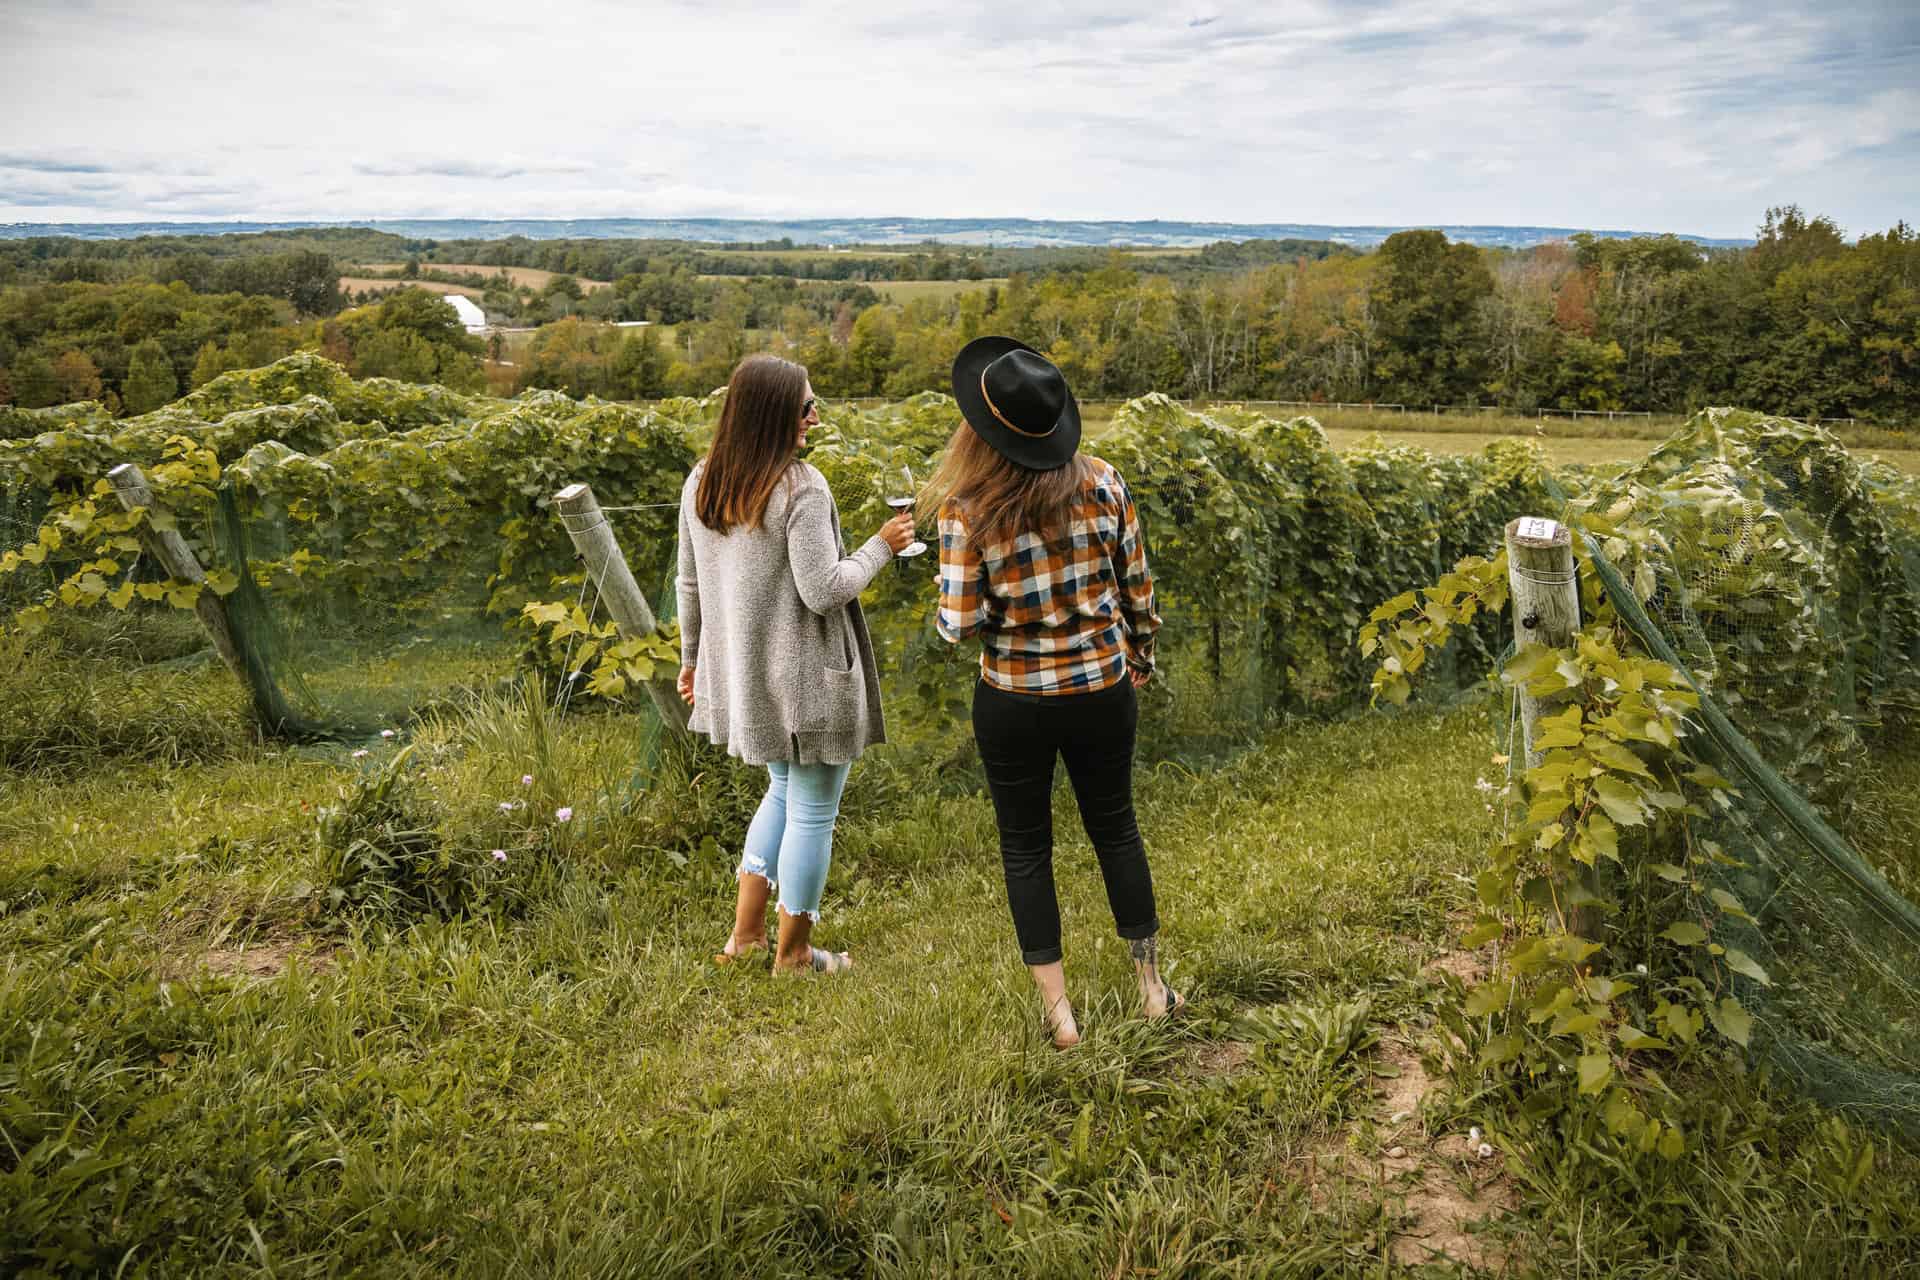 two women are standing in a vineyard doing a cheers motion with their wine glasses. it looks like a beautiful fall day with a couple clouds in the sky. they are wearing cardigans and flannel